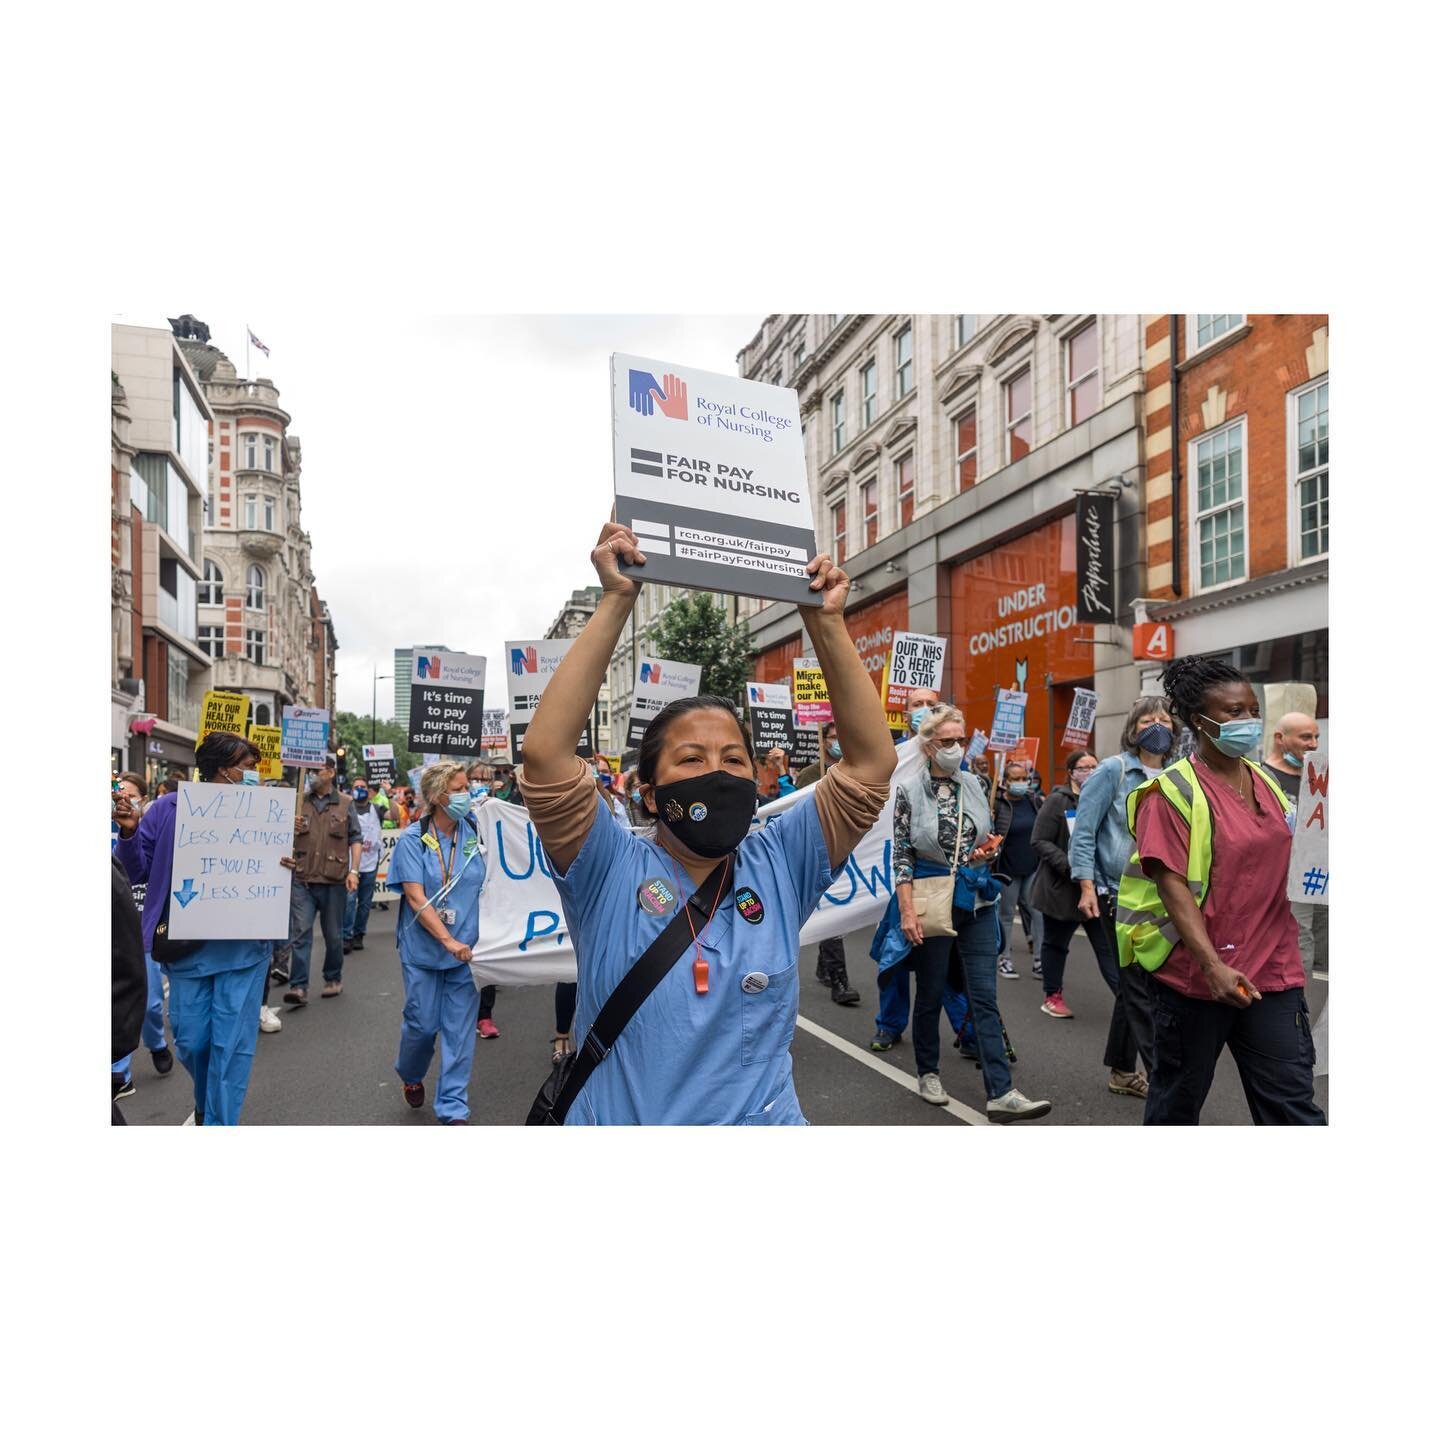 Photojournalism on @msn @guardian @dailyexpress 

3rd July at University College Hospital - called by @nhsworkerssayno and supported by @unitetheunion @thercn , members of the NHS were seen marching to demand fair pay in response to the government&rs